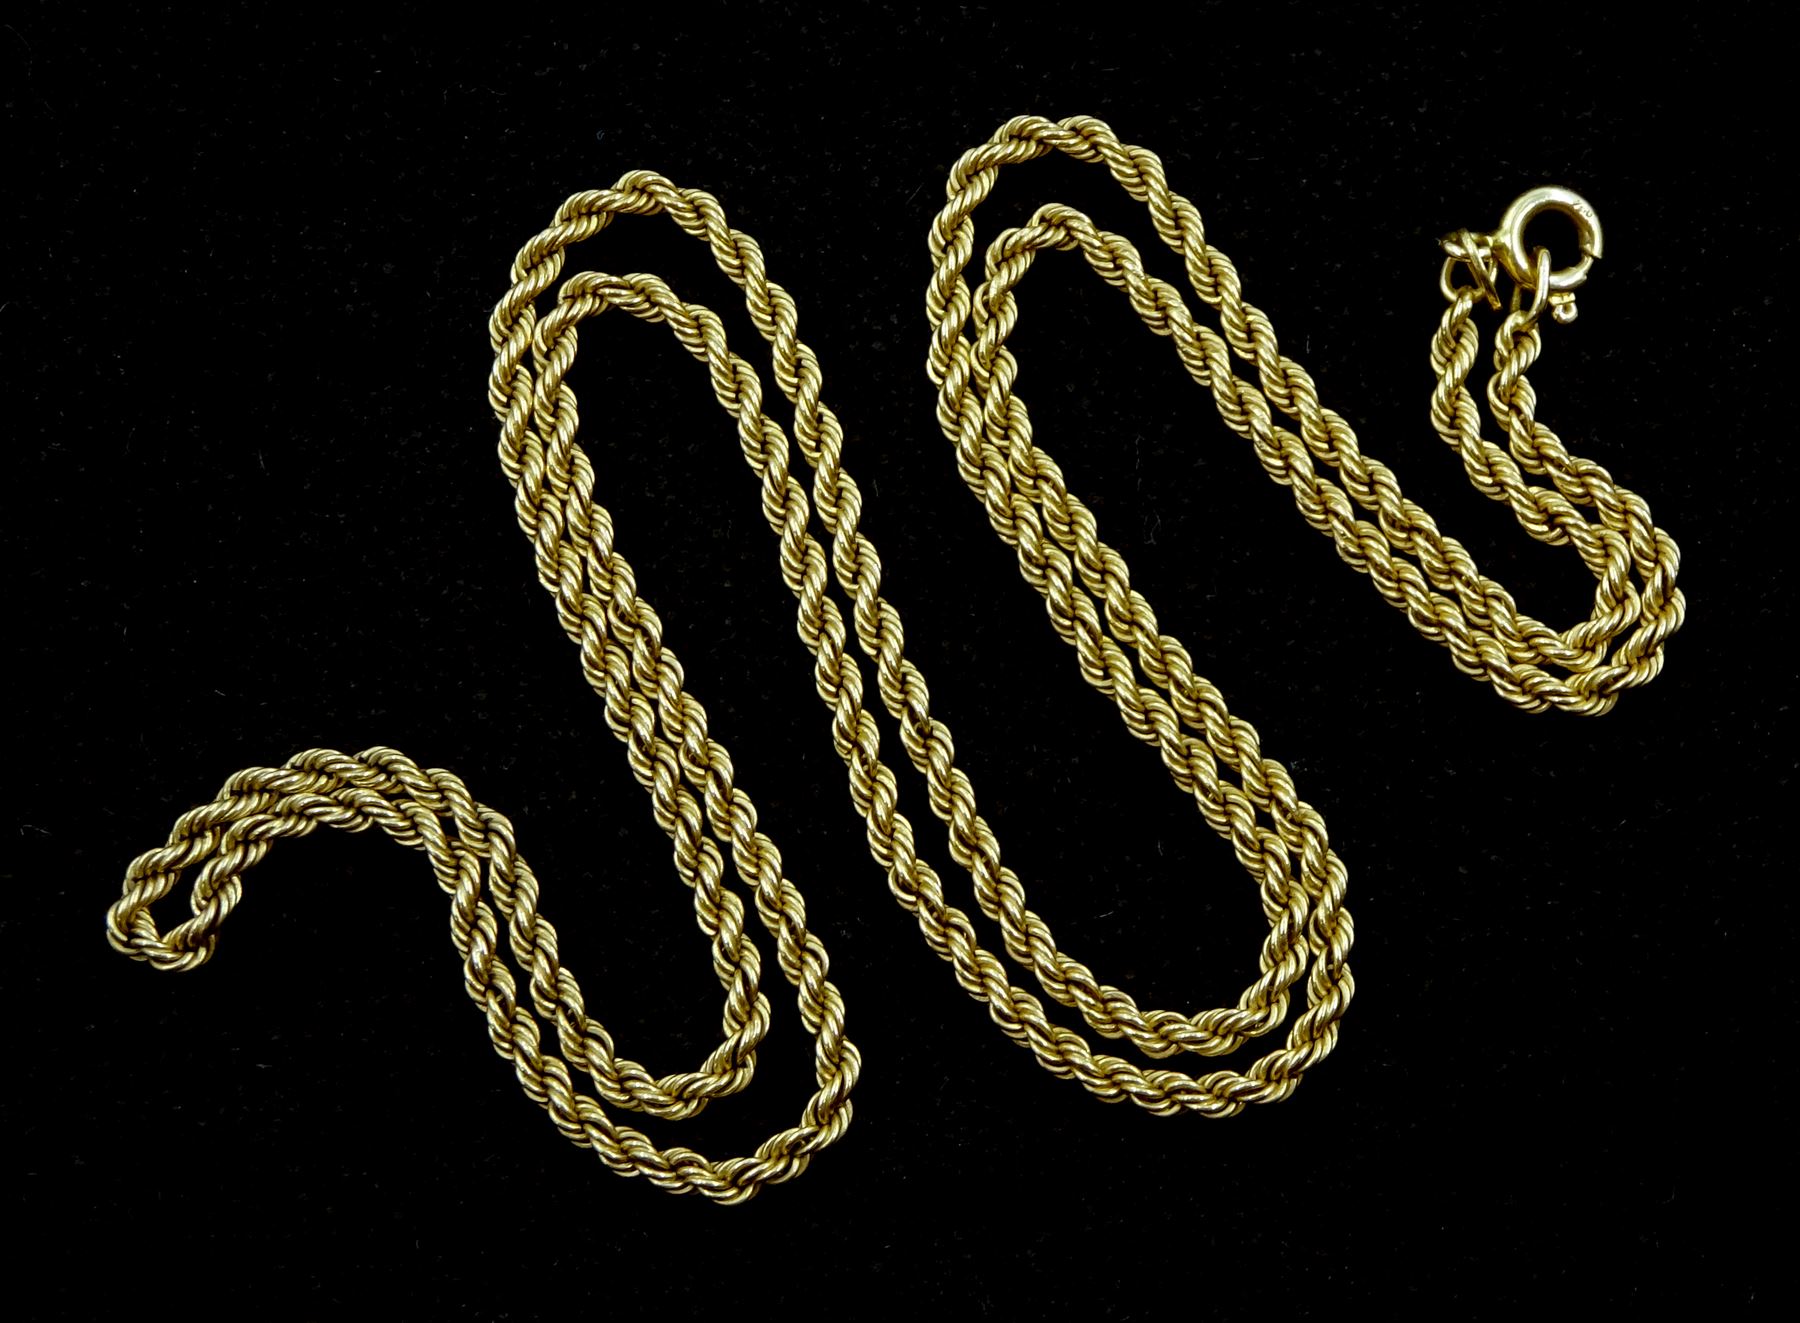 18ct gold rope twist chain necklace - Image 2 of 2